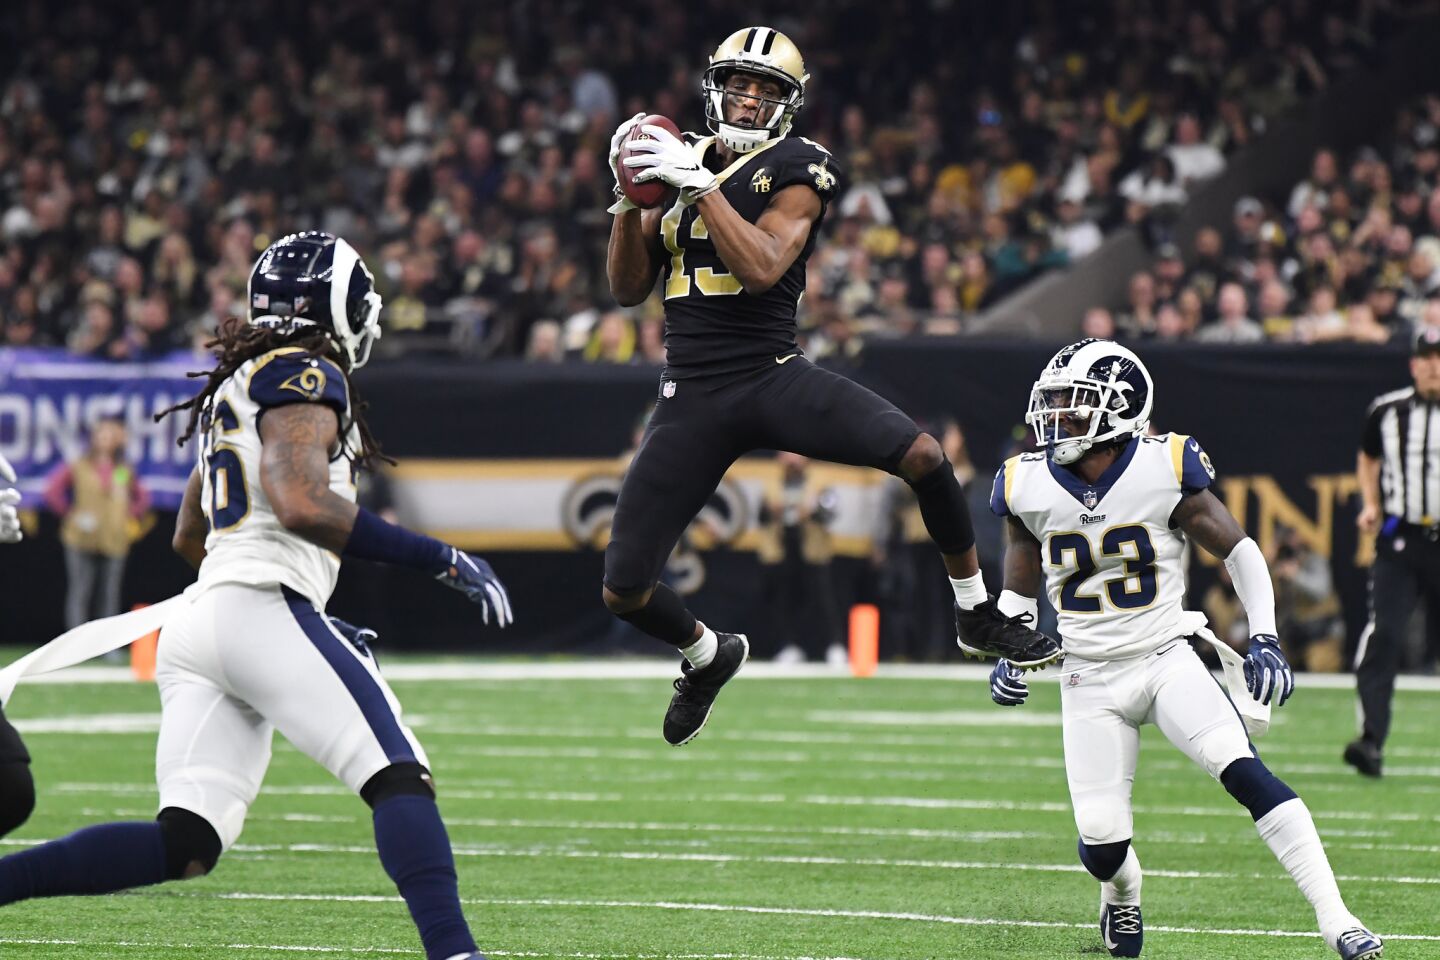 New Orleans Saints receiver receiver Michael Thomas makes a catch in fornt of Rams' Nickell Robey-Coleman (23) in the third quarter in the NFC Championship at the Superdome in New Orleans Sunday.